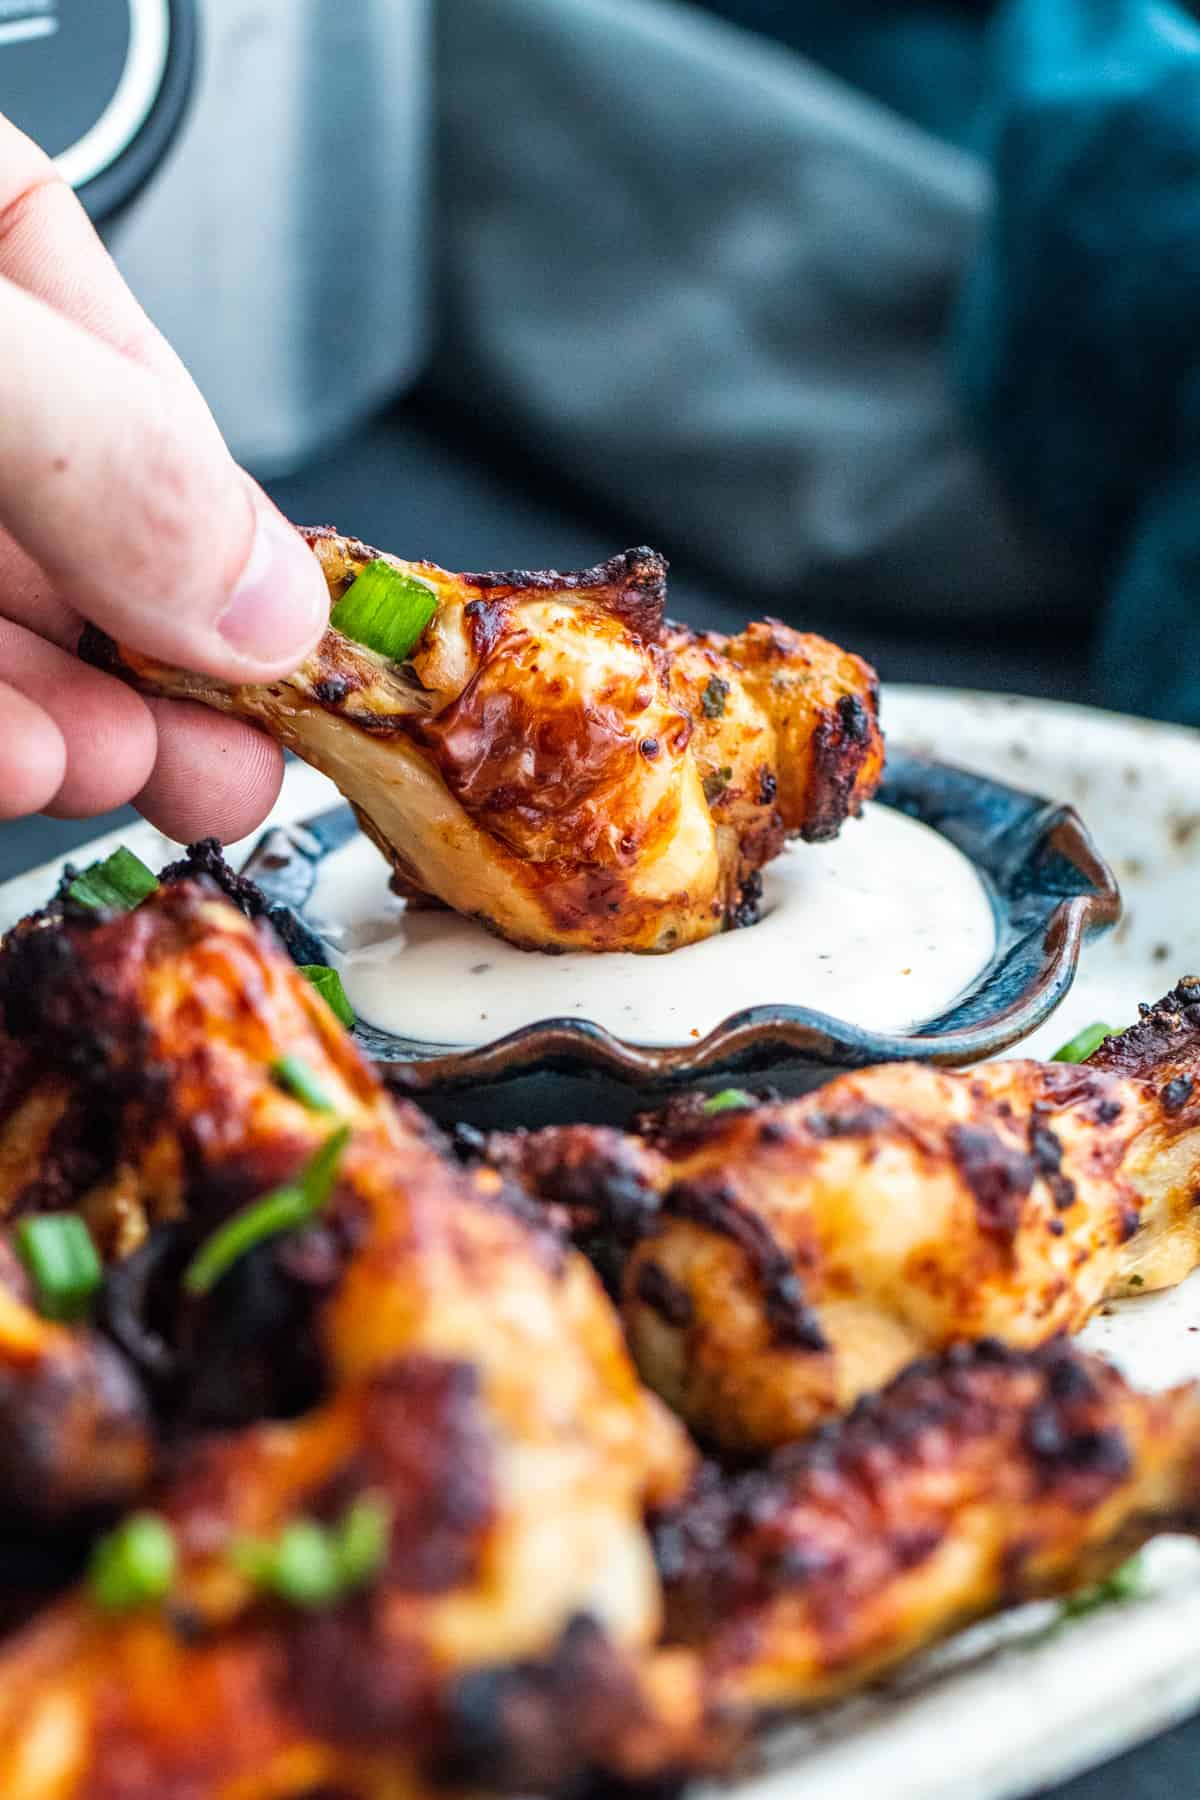 Hand dipping wing into small bowl of ranch.